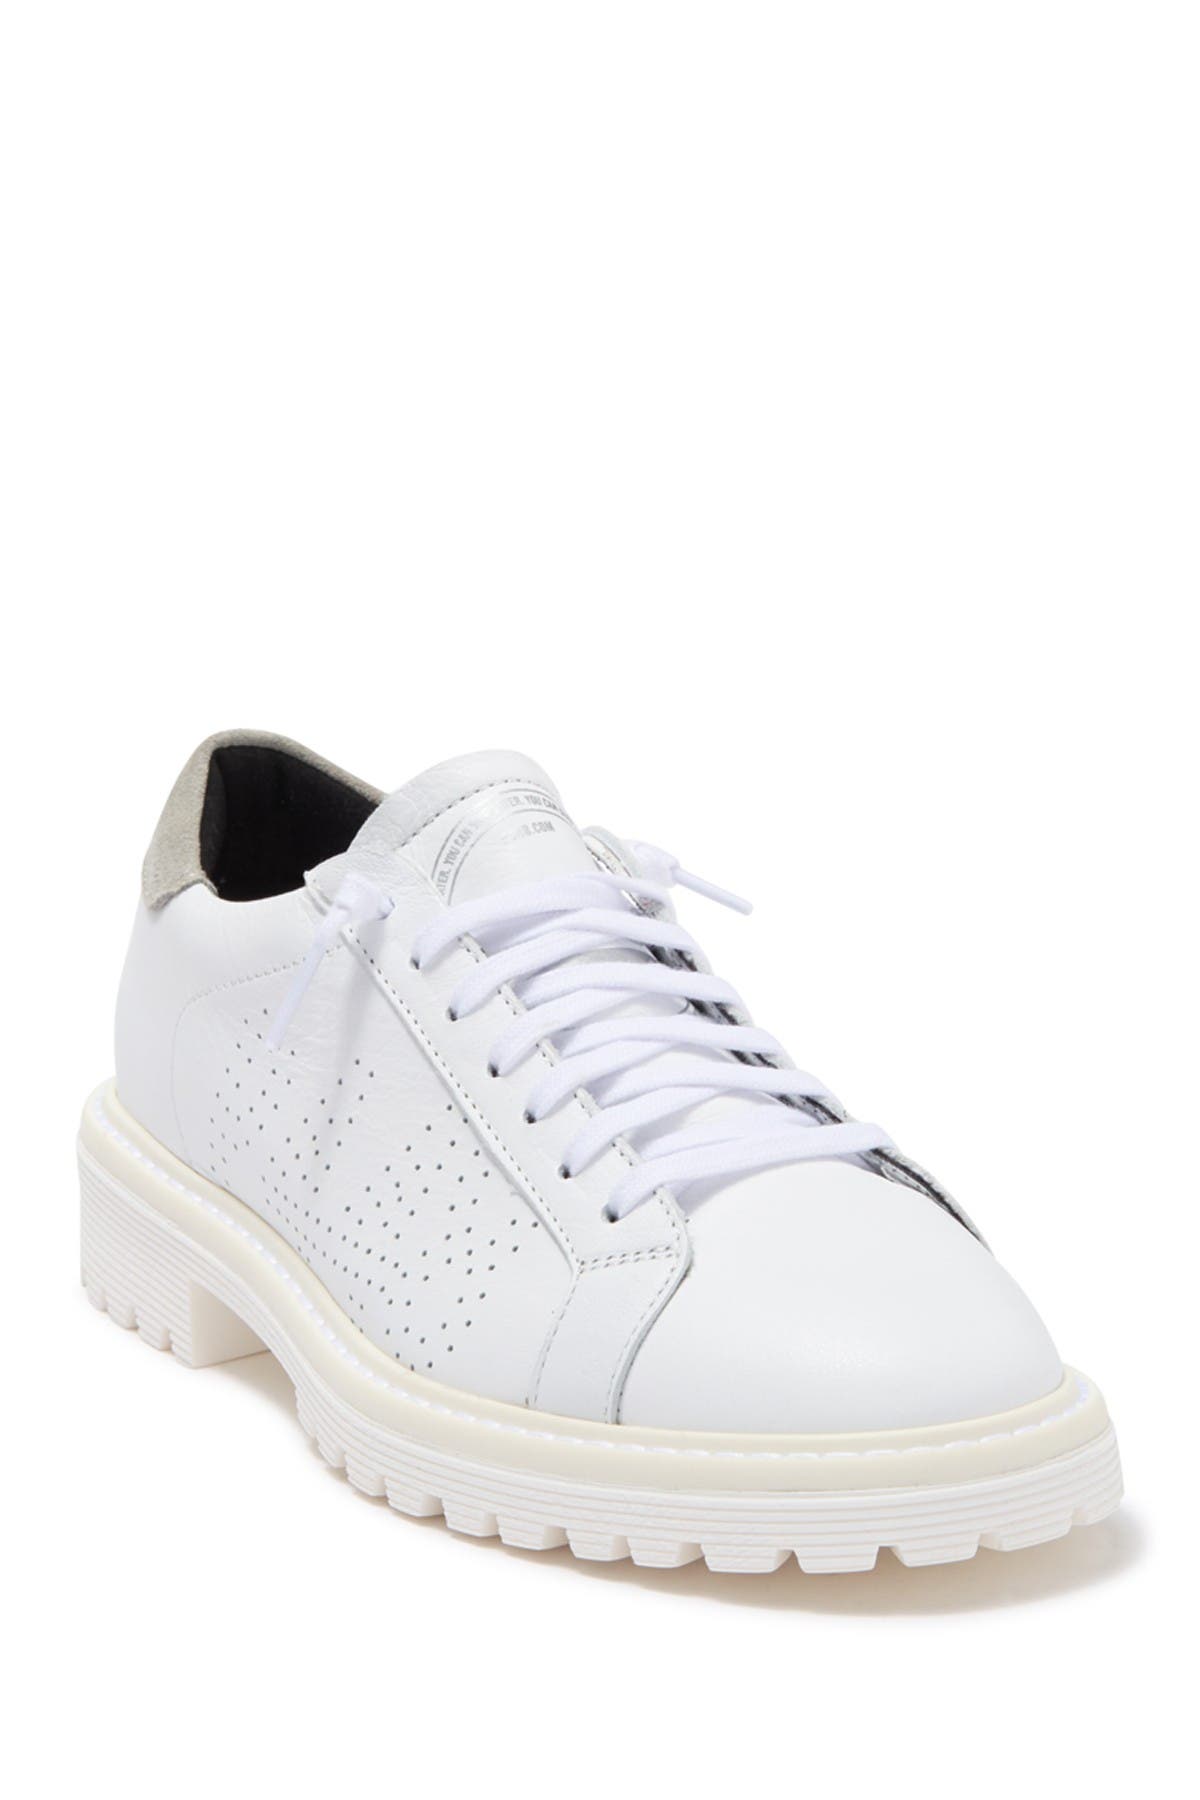 nordstrom rack womens athletic shoes